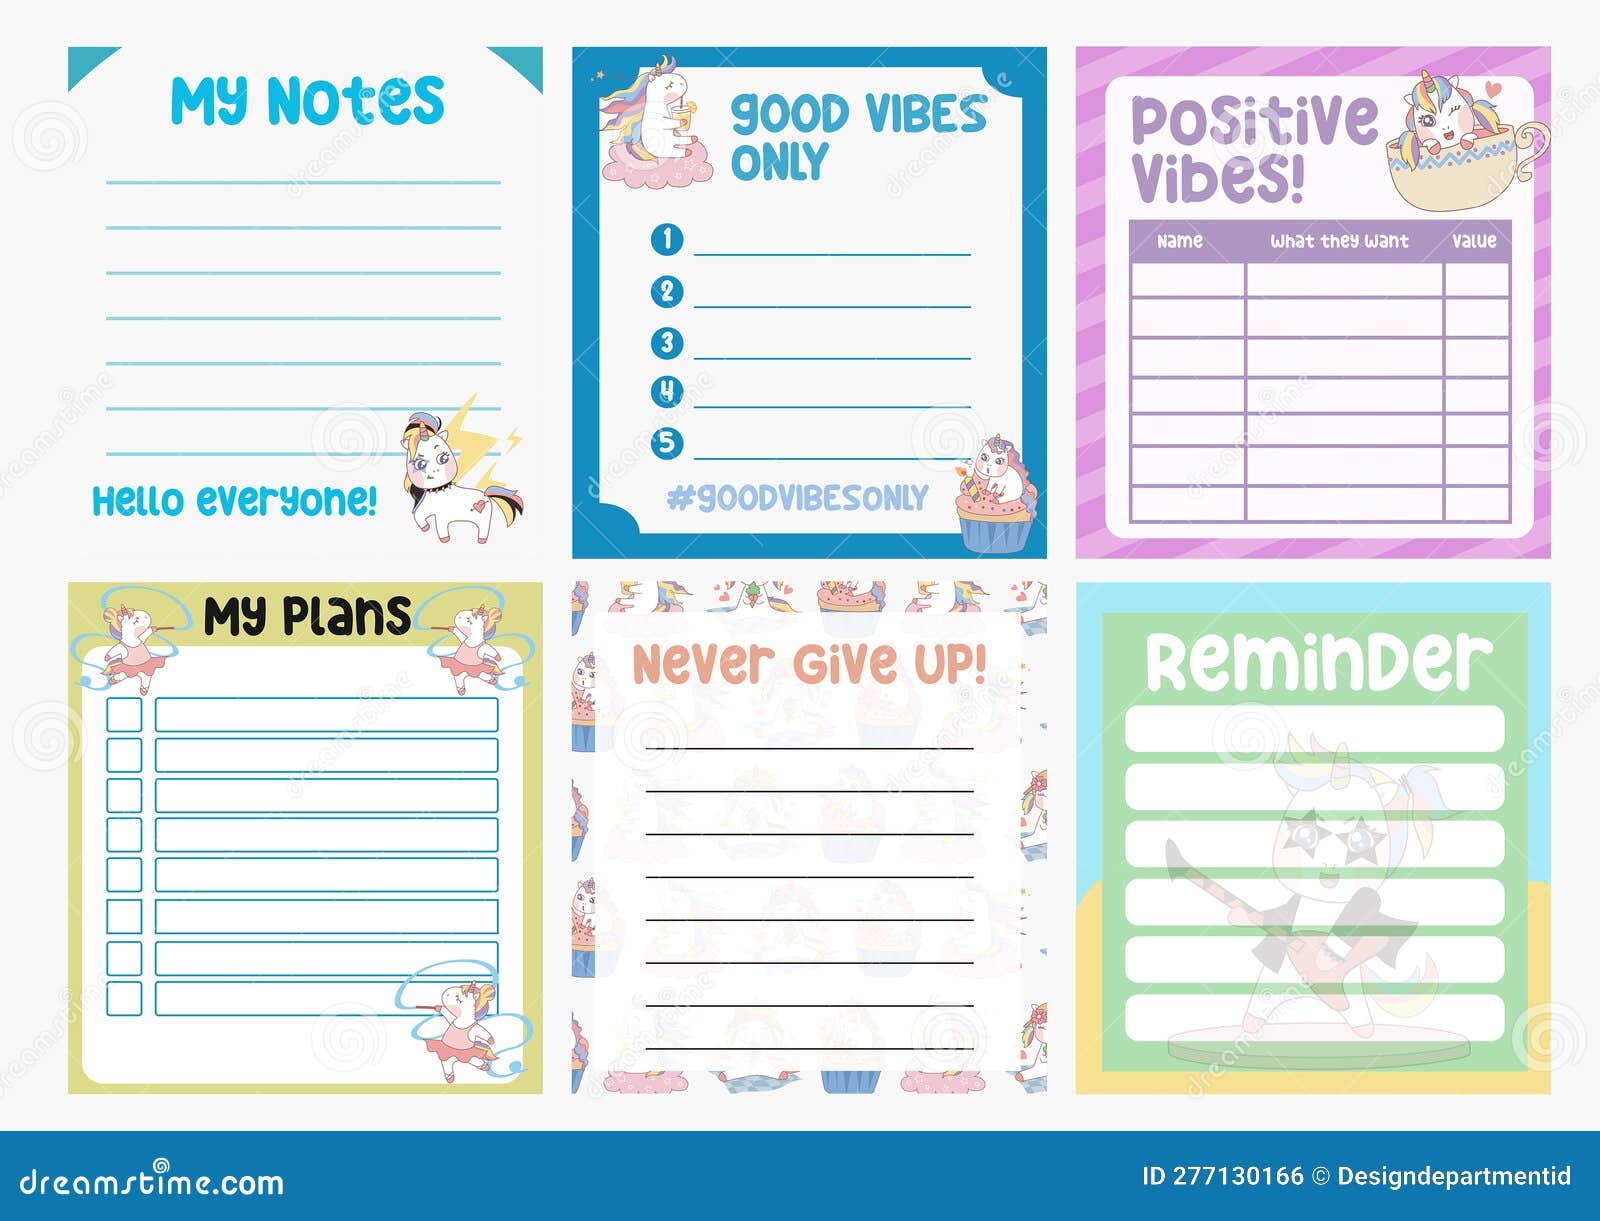 Full Stationery Kit designs, themes, templates and downloadable